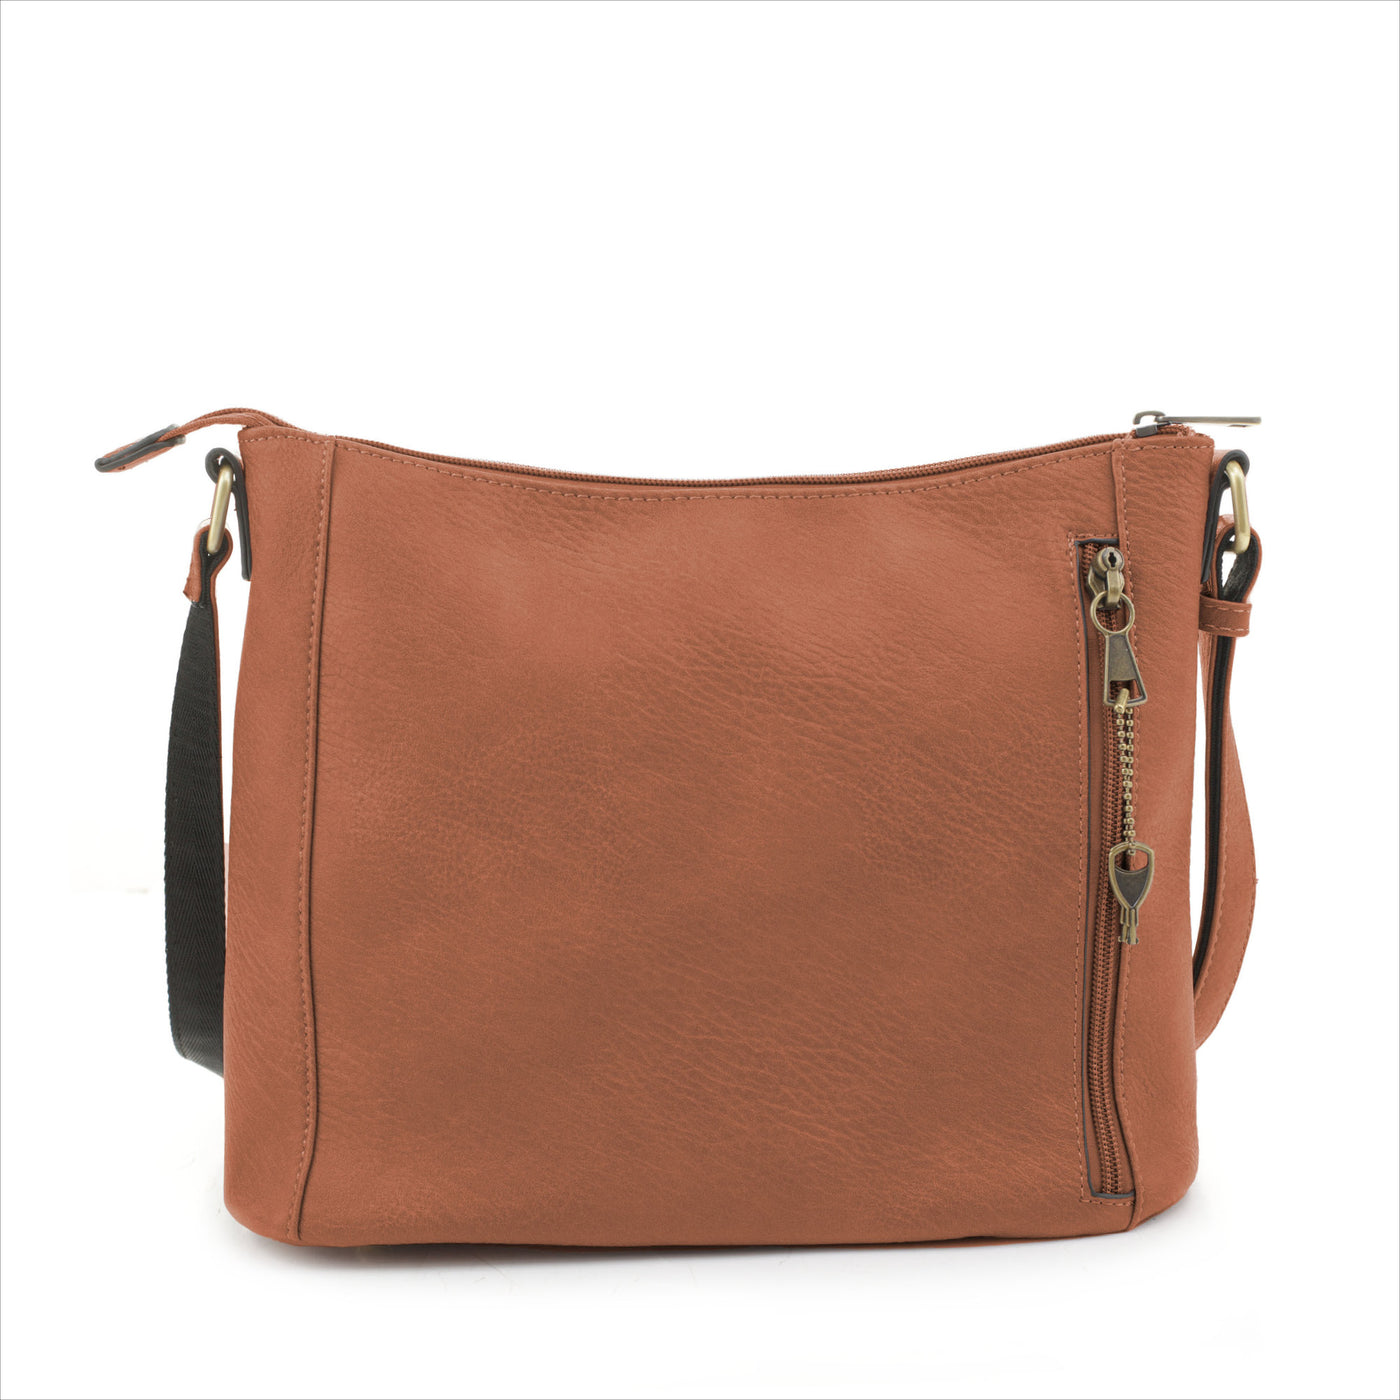 Esther Concealed Carry Lock and Key Crossbody